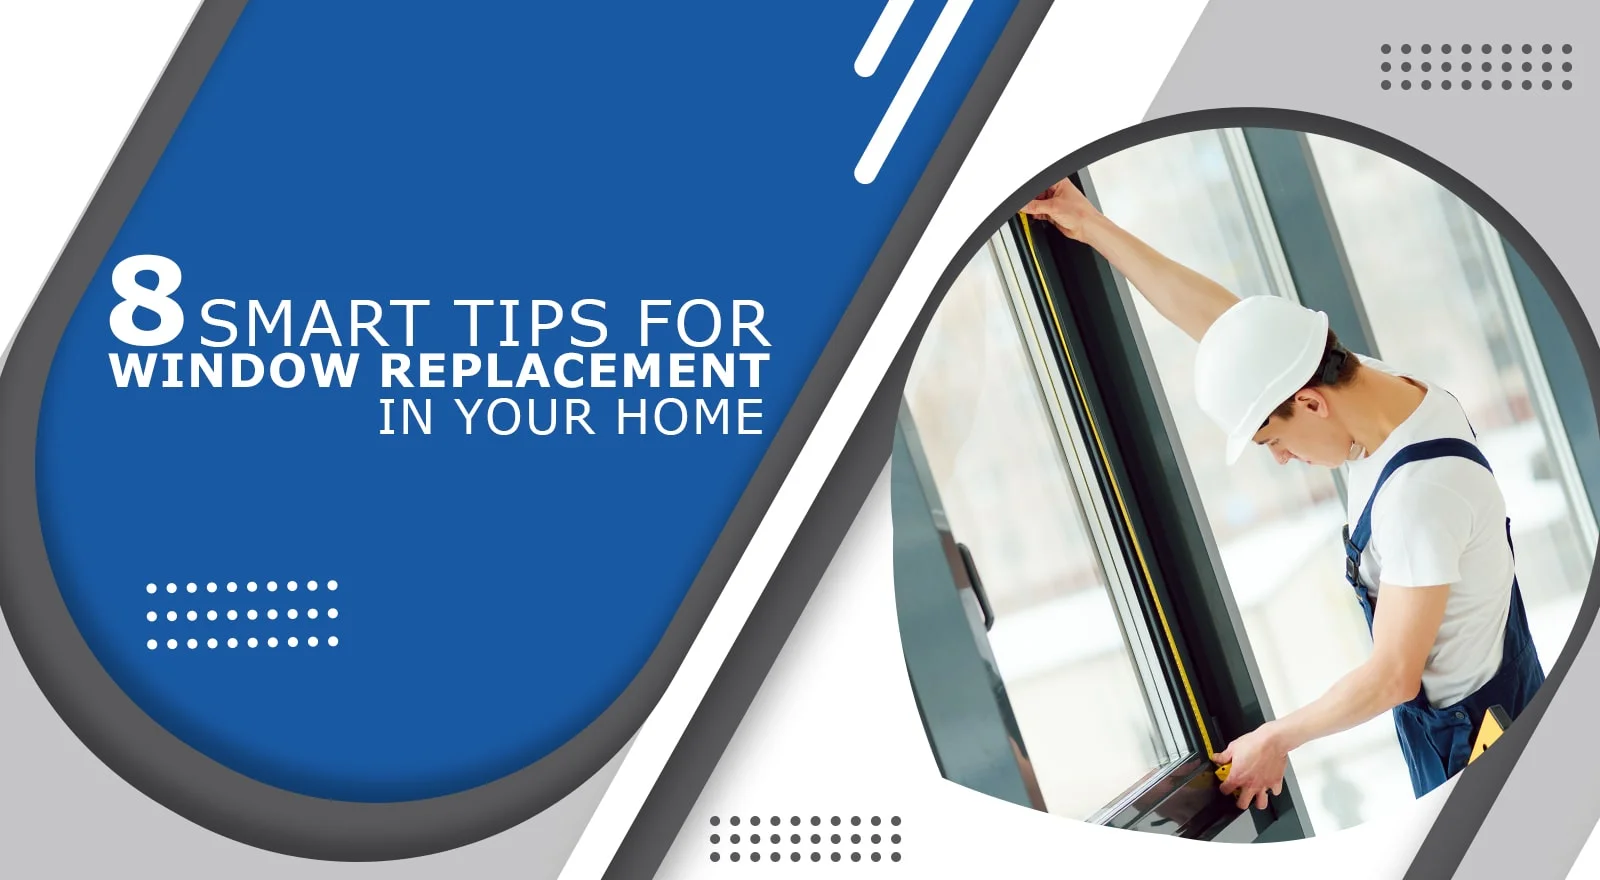 8 Smart Tips for Window Replacement in Your Home